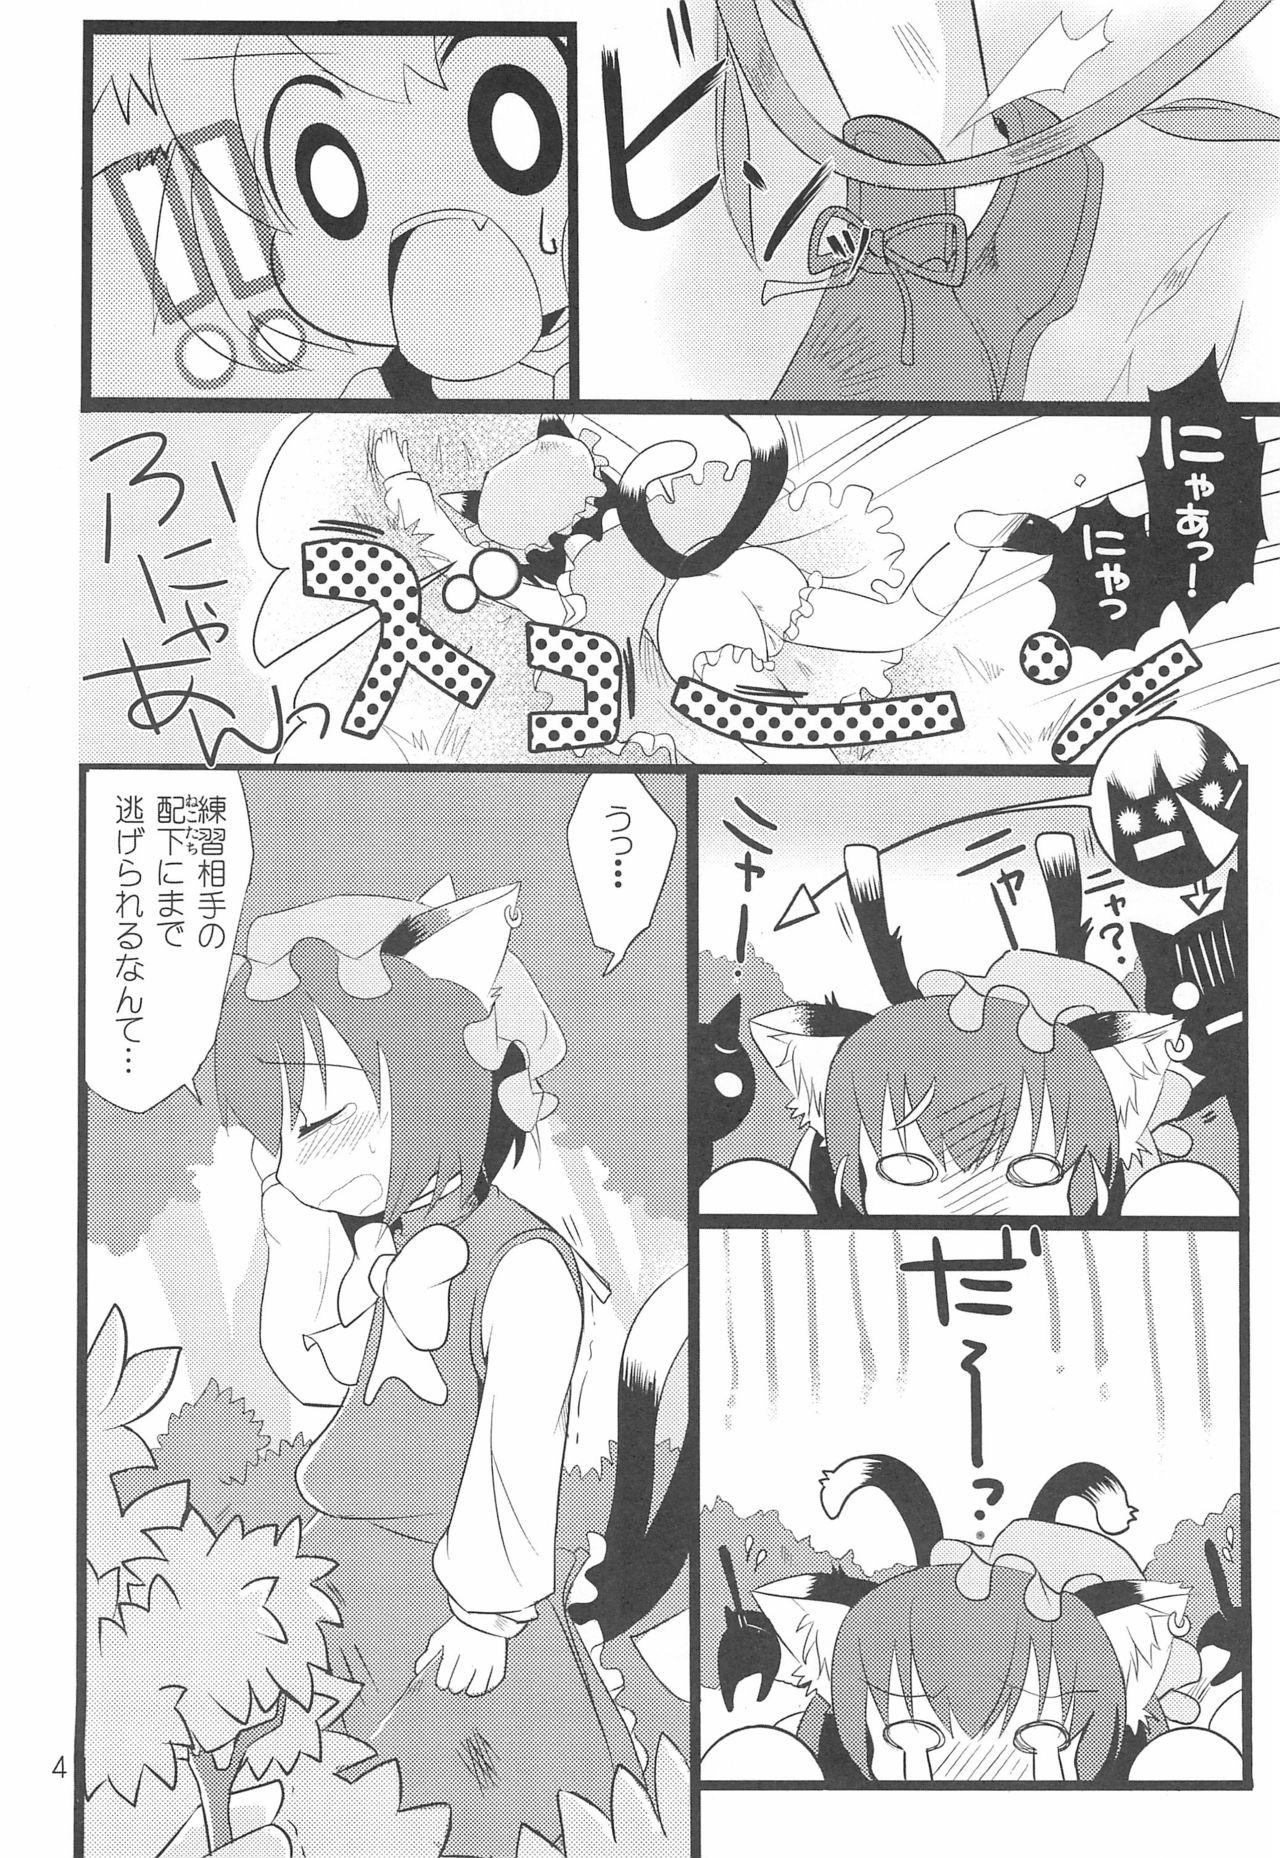 Swallowing Chenkle Star Sprites - Touhou project Step Mom - Page 4